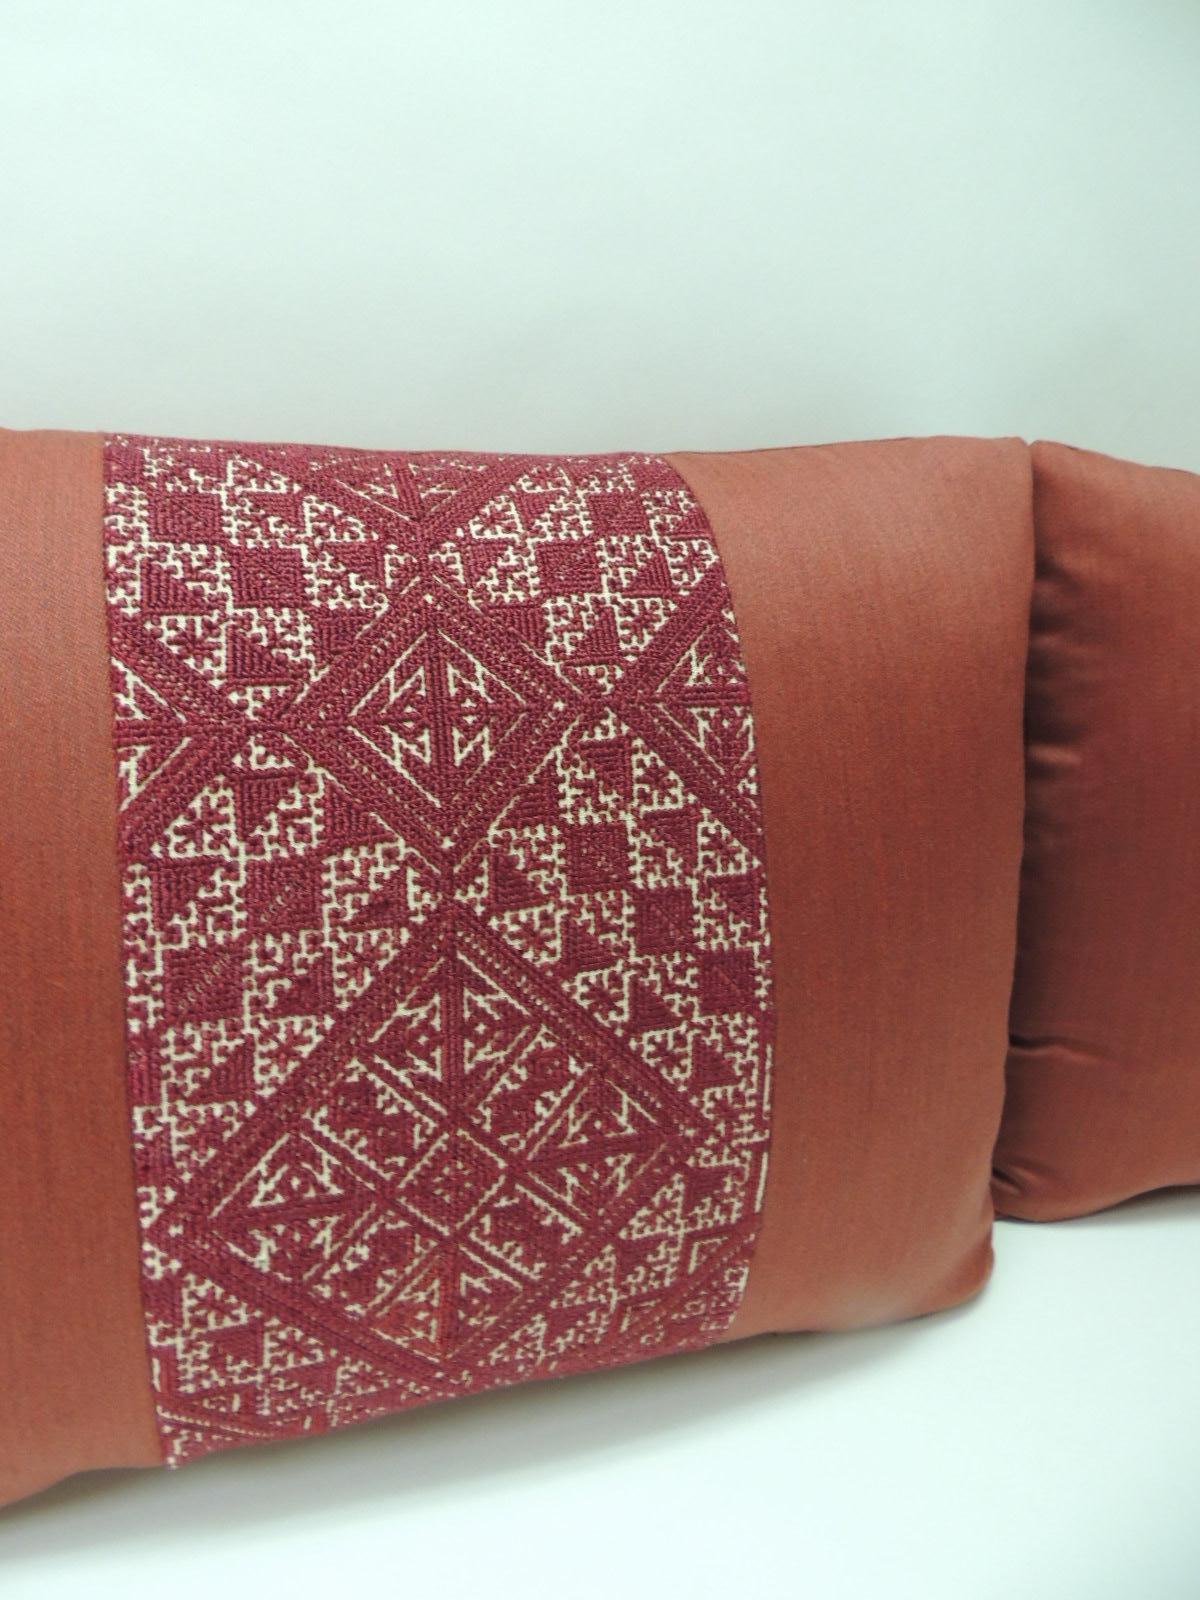 Pair of 19th century woven red fez textile bolster decorative pillows
Antique red Fez textile pair of bolster decorative pillows hand-stitched. Traditional antique Fez textile embroidery red silk hand-stitched onto red cashmere frames and backings.